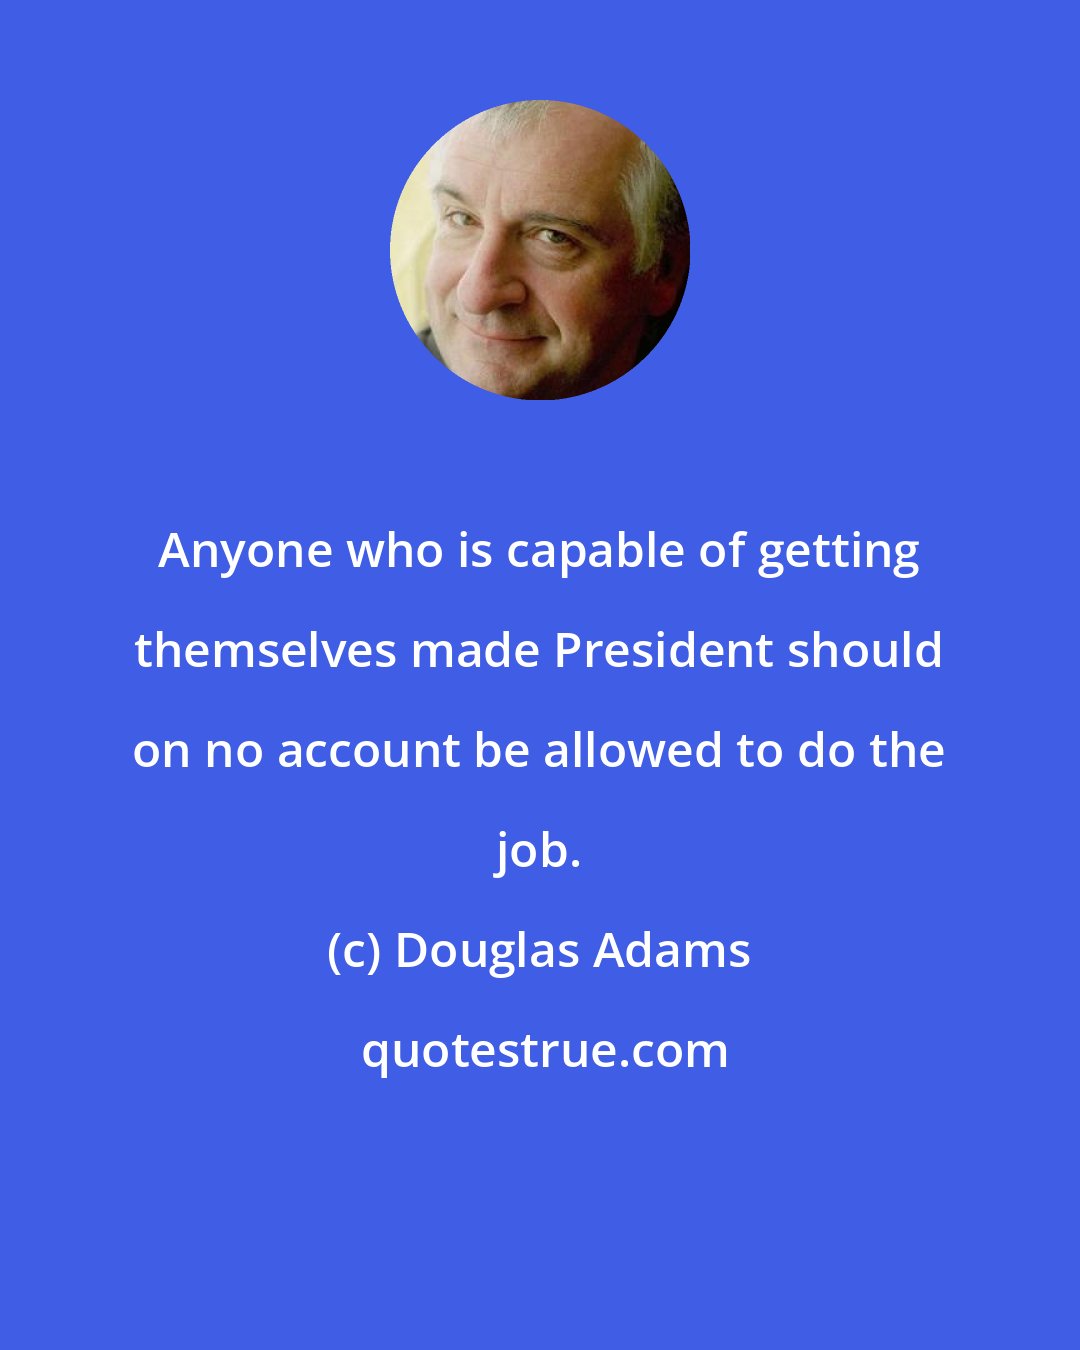 Douglas Adams: Anyone who is capable of getting themselves made President should on no account be allowed to do the job.